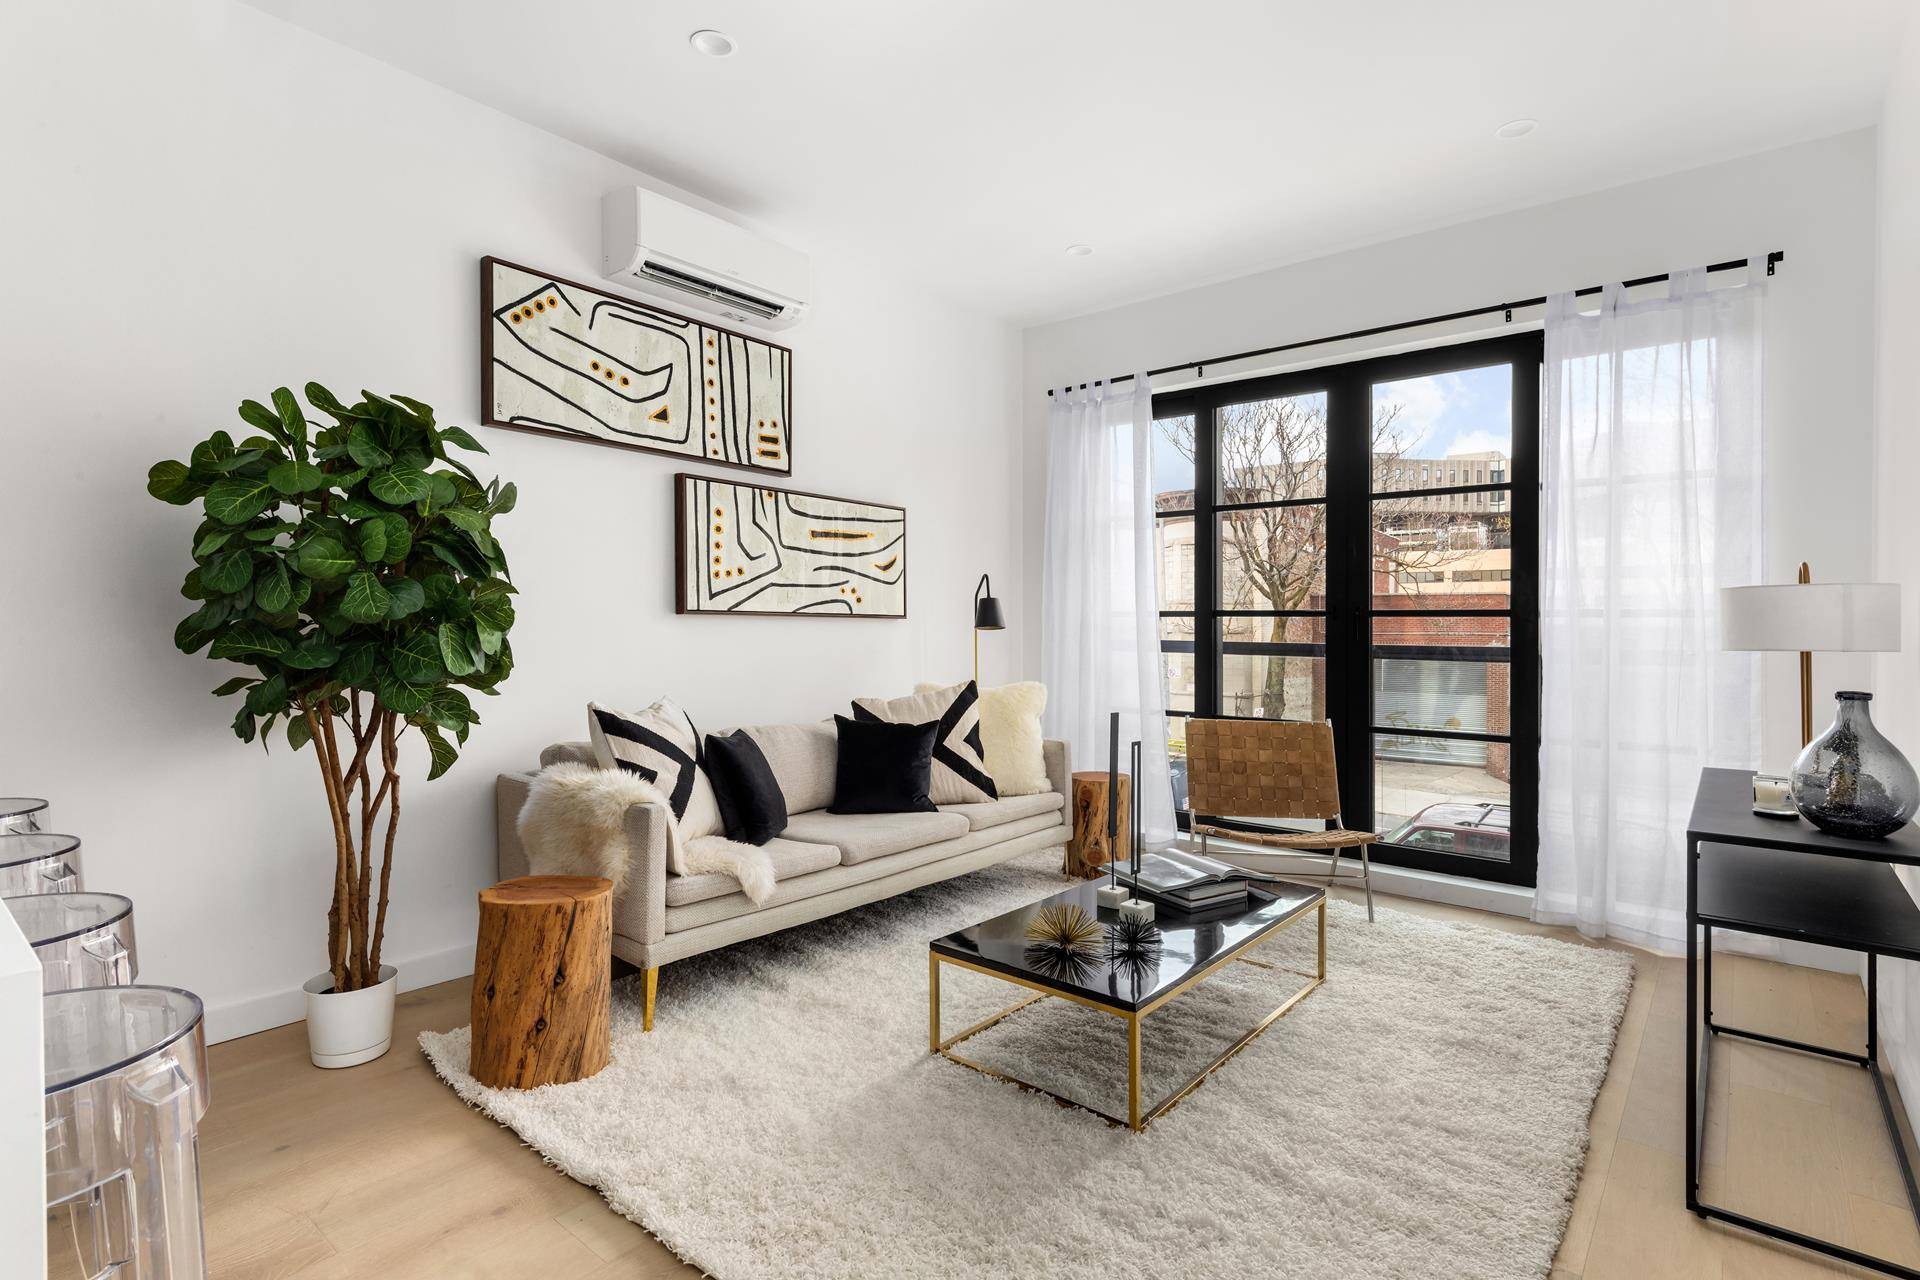 Welcome to 1572 Pacific Street, Brooklyn's newest boutique condominium building located on the trendy and convenient border of Crown Heights and Bed Stuy.